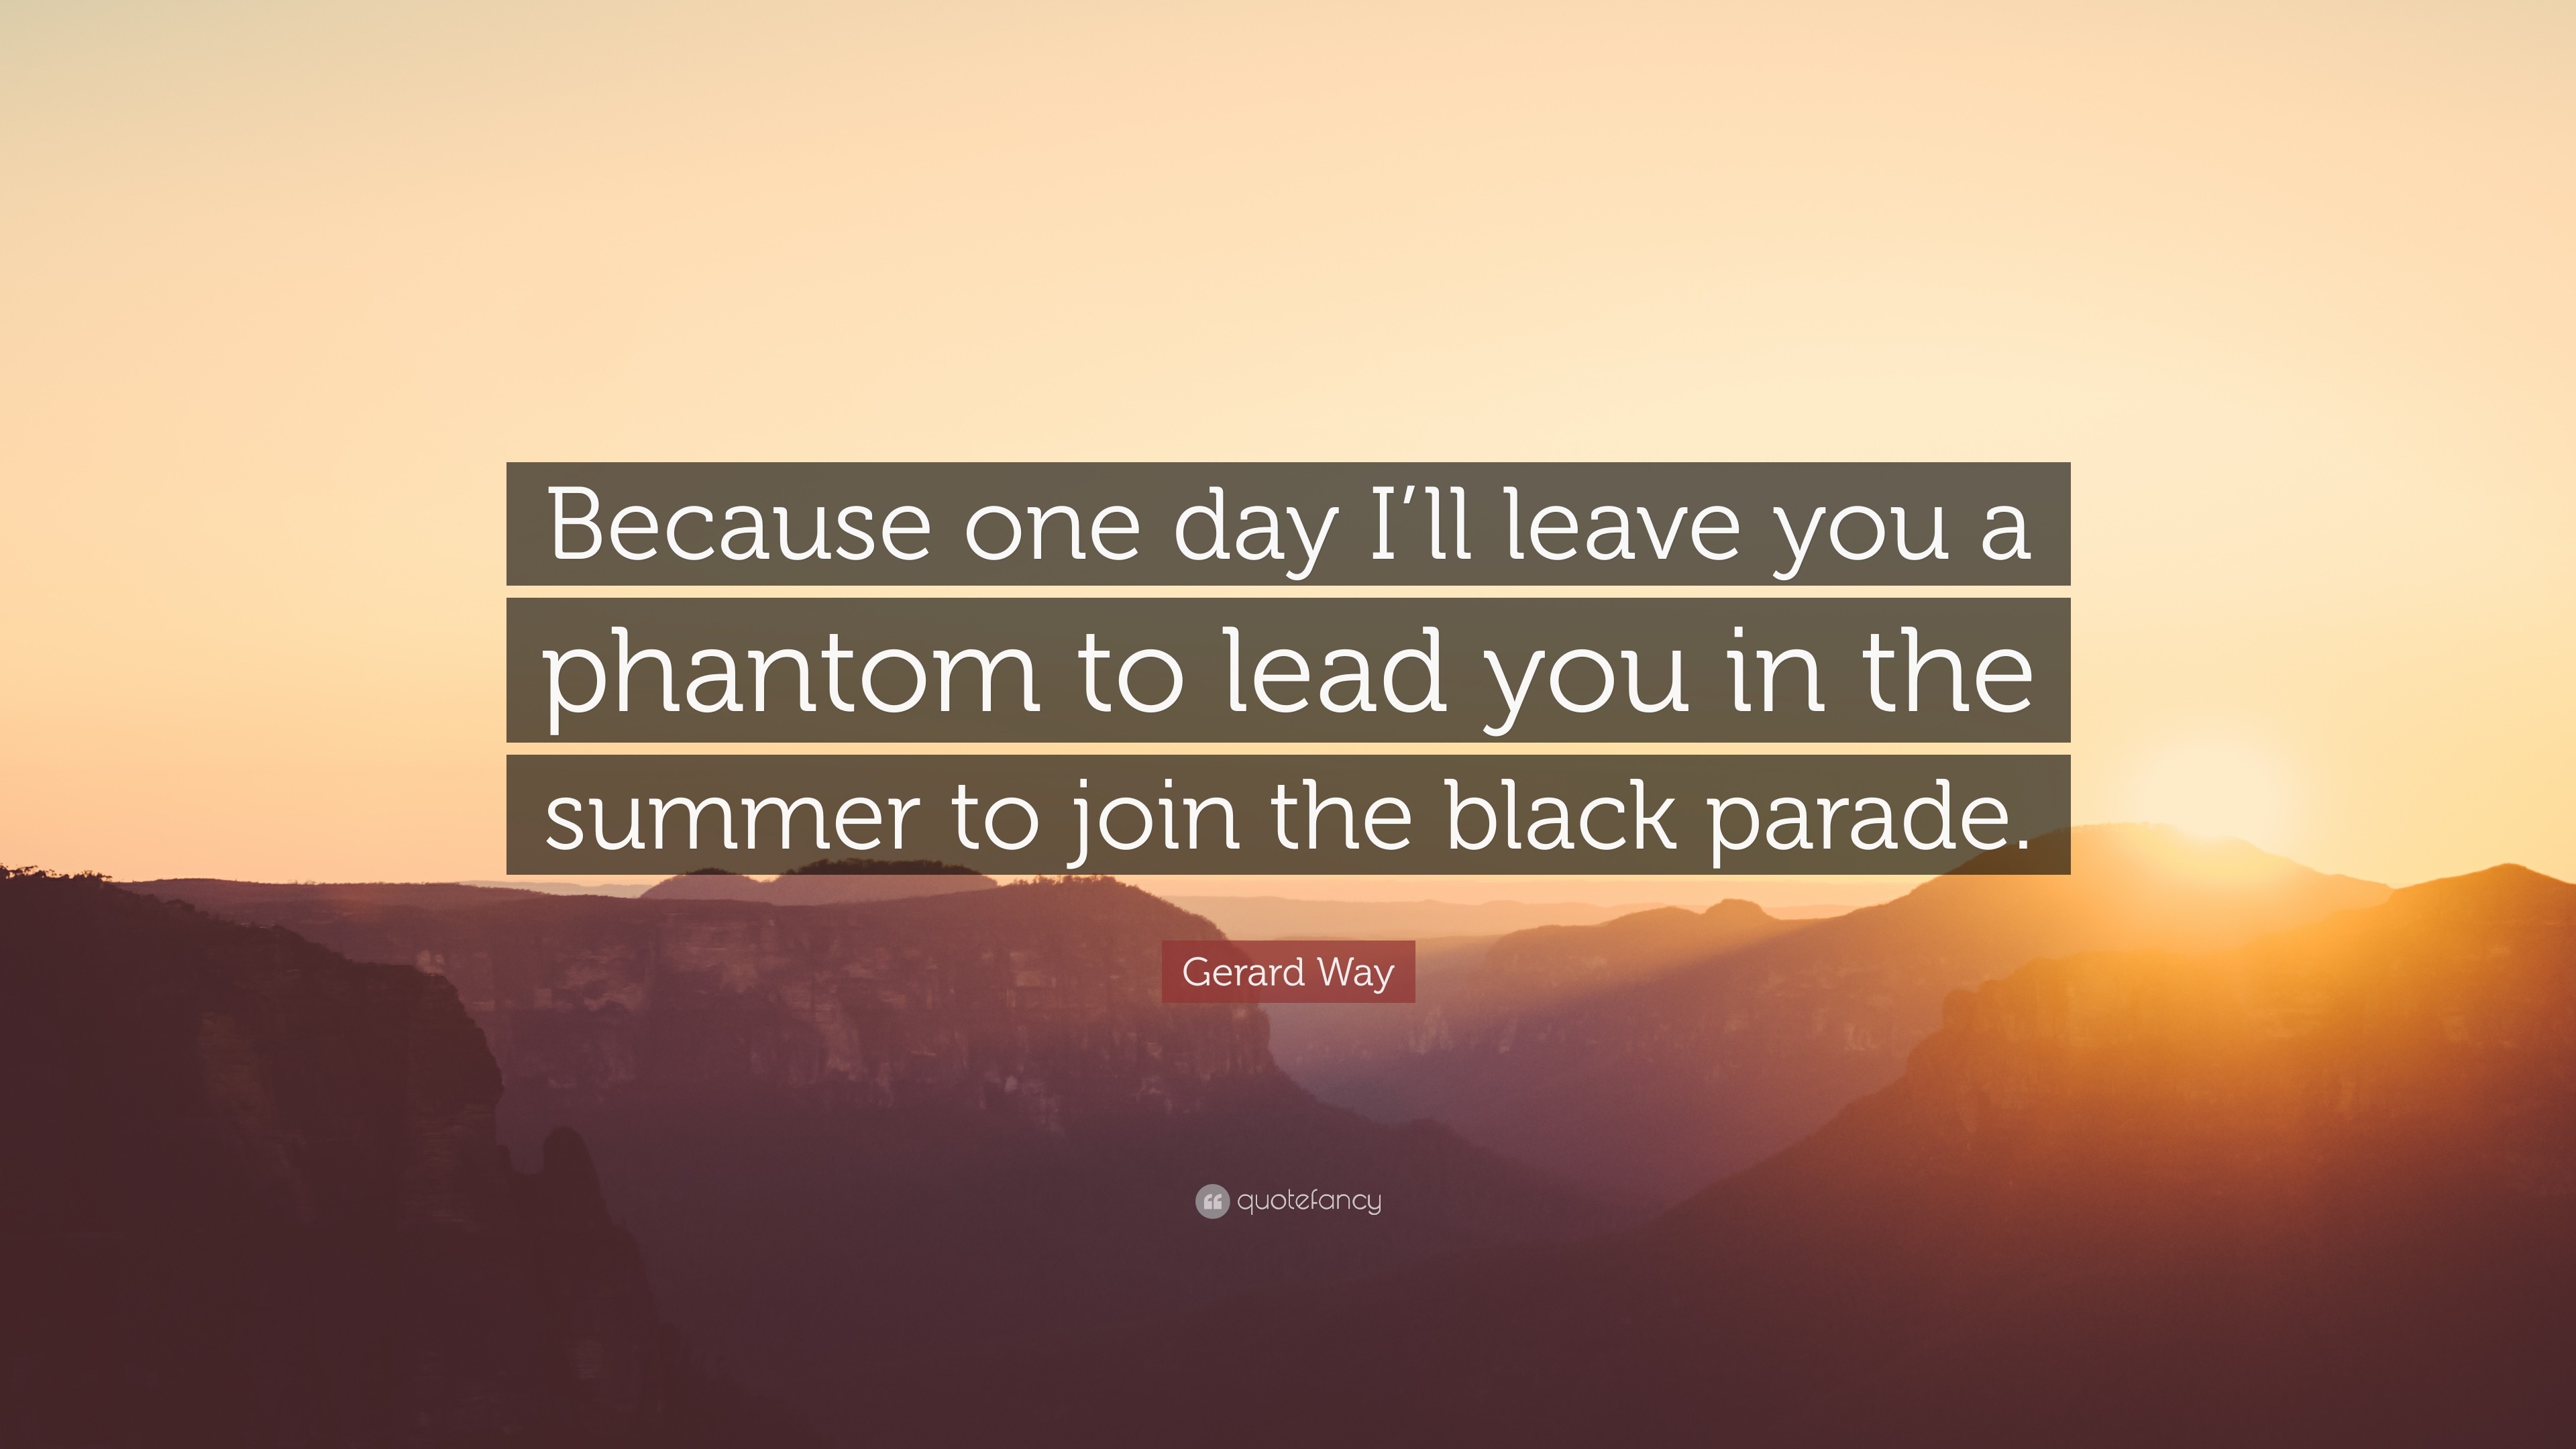 3840x2160 Gerard Way Quote: “Because one day I'll leave you a phantom to